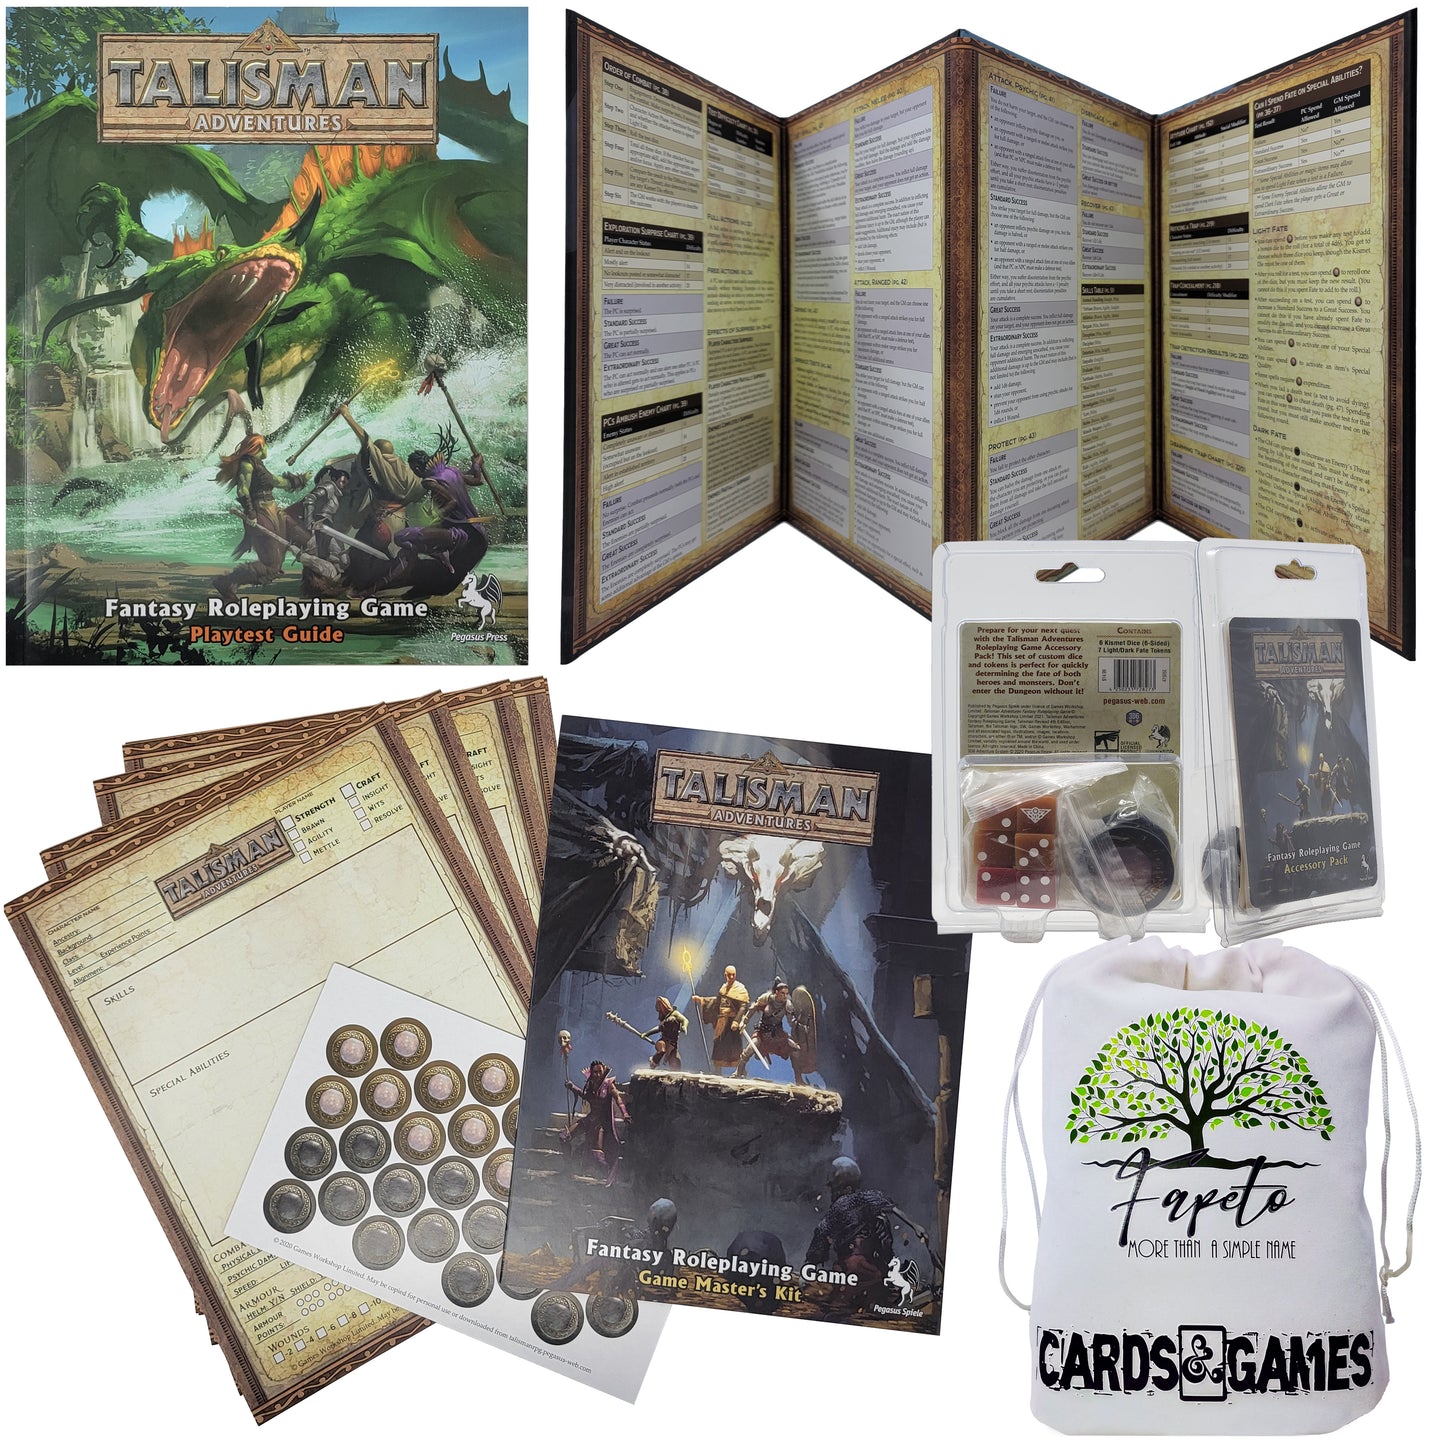 Fantasy Roleplaying Game Talisman Adventure Playtest Guide,  Game Master Kit and Accessory Pack With Random Color Drawstring Bag